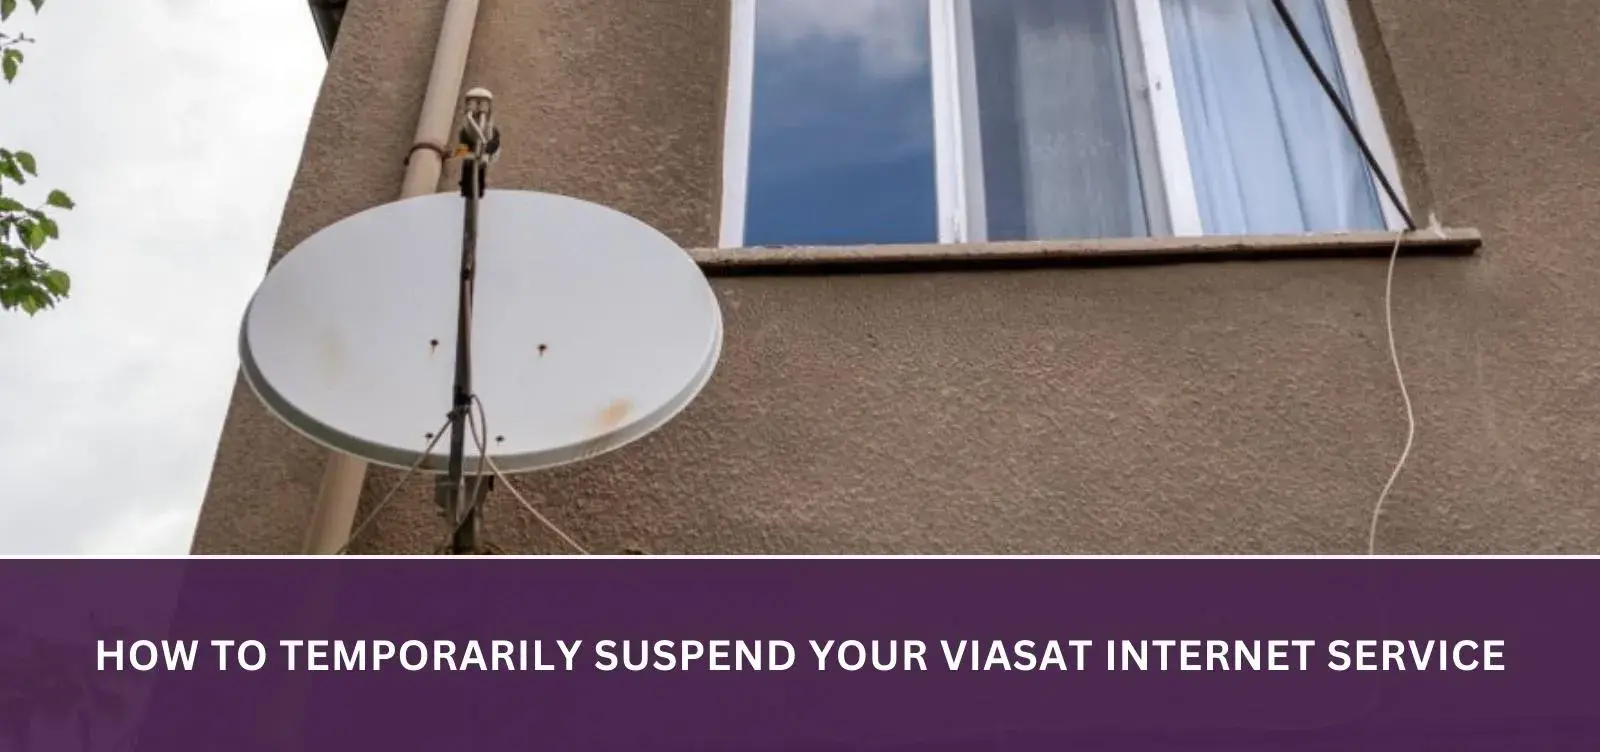 How to temporarily suspend your Viasat Internet service